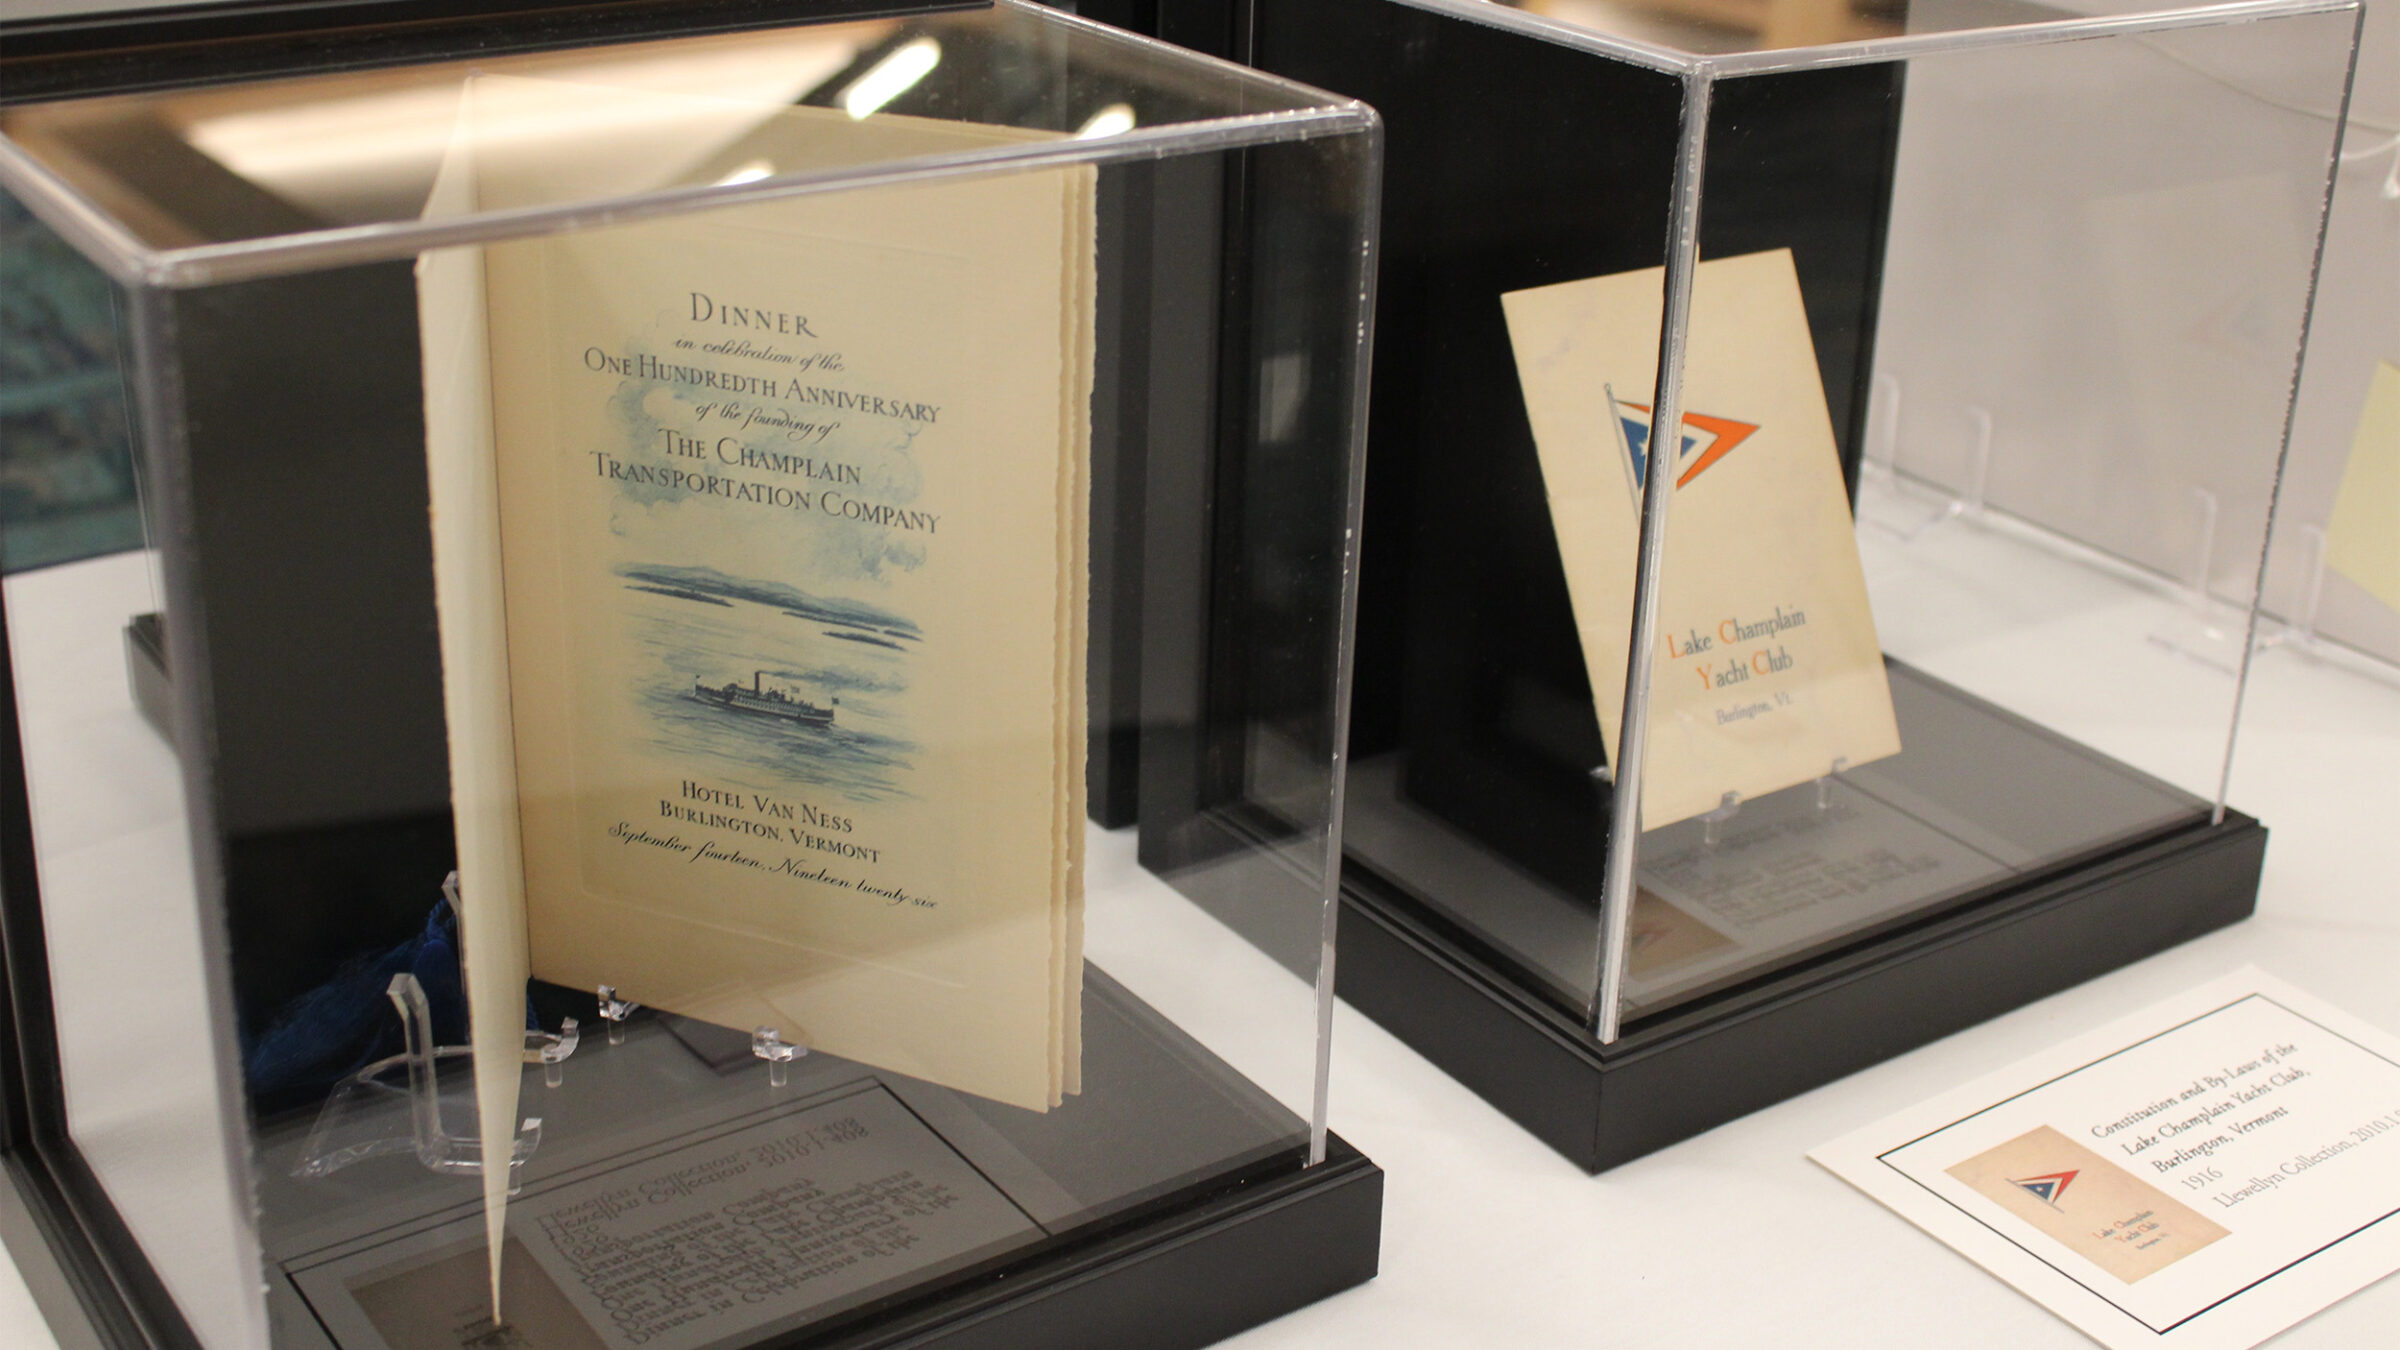 Menu for the 100th anniversary of the Champlain Transportation Company and pamphlet for the Lake Champlain Yacht club on stands under display glass.